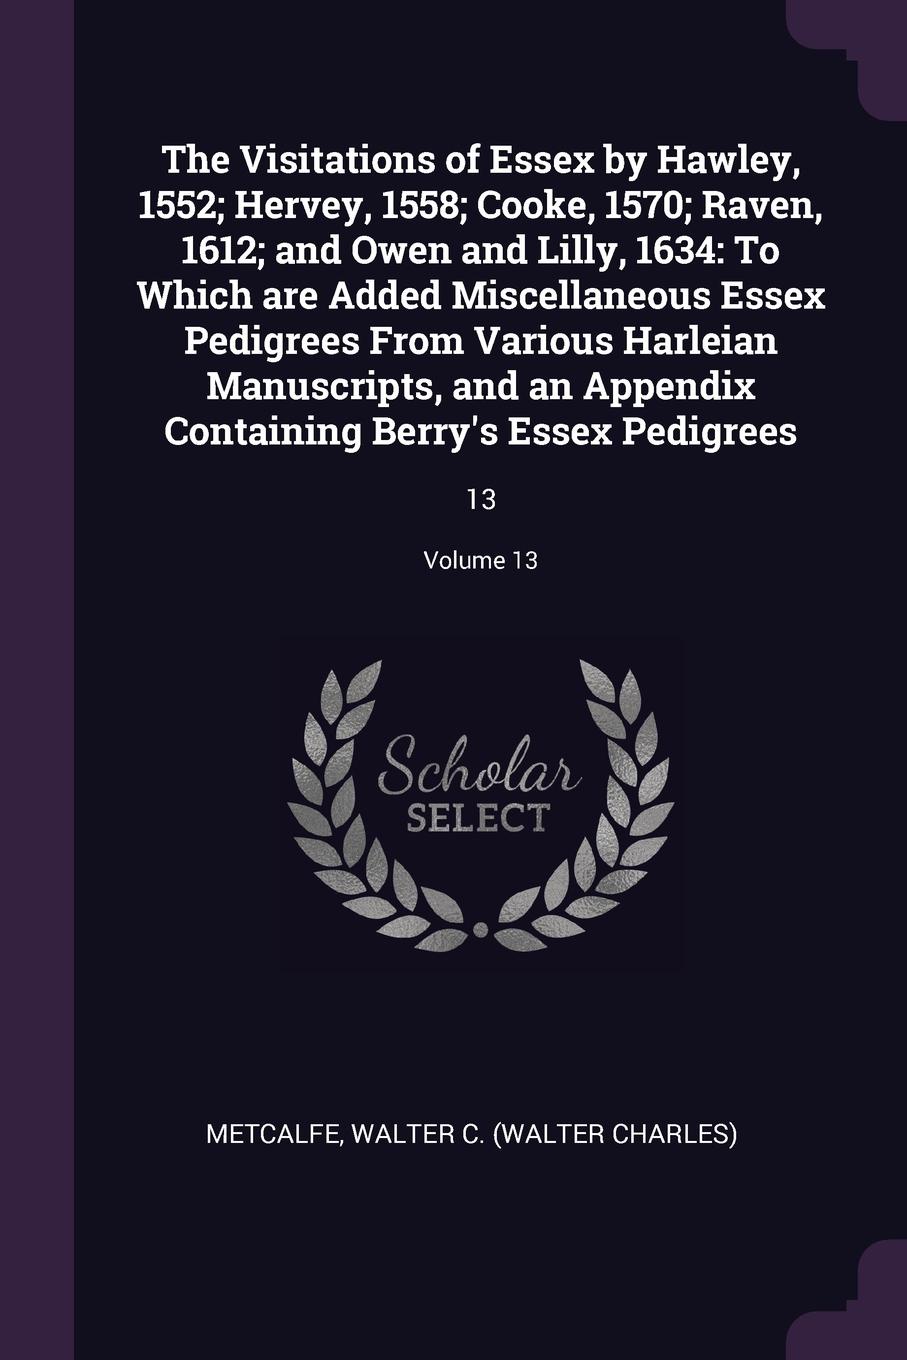 The Visitations of Essex by Hawley, 1552; Hervey, 1558; Cooke, 1570; Raven, 1612; and Owen and Lilly, 1634. To Which are Added Miscellaneous Essex Pedigrees From Various Harleian Manuscripts, and an Appendix Containing Berry`s Essex Pedigrees: 13;...